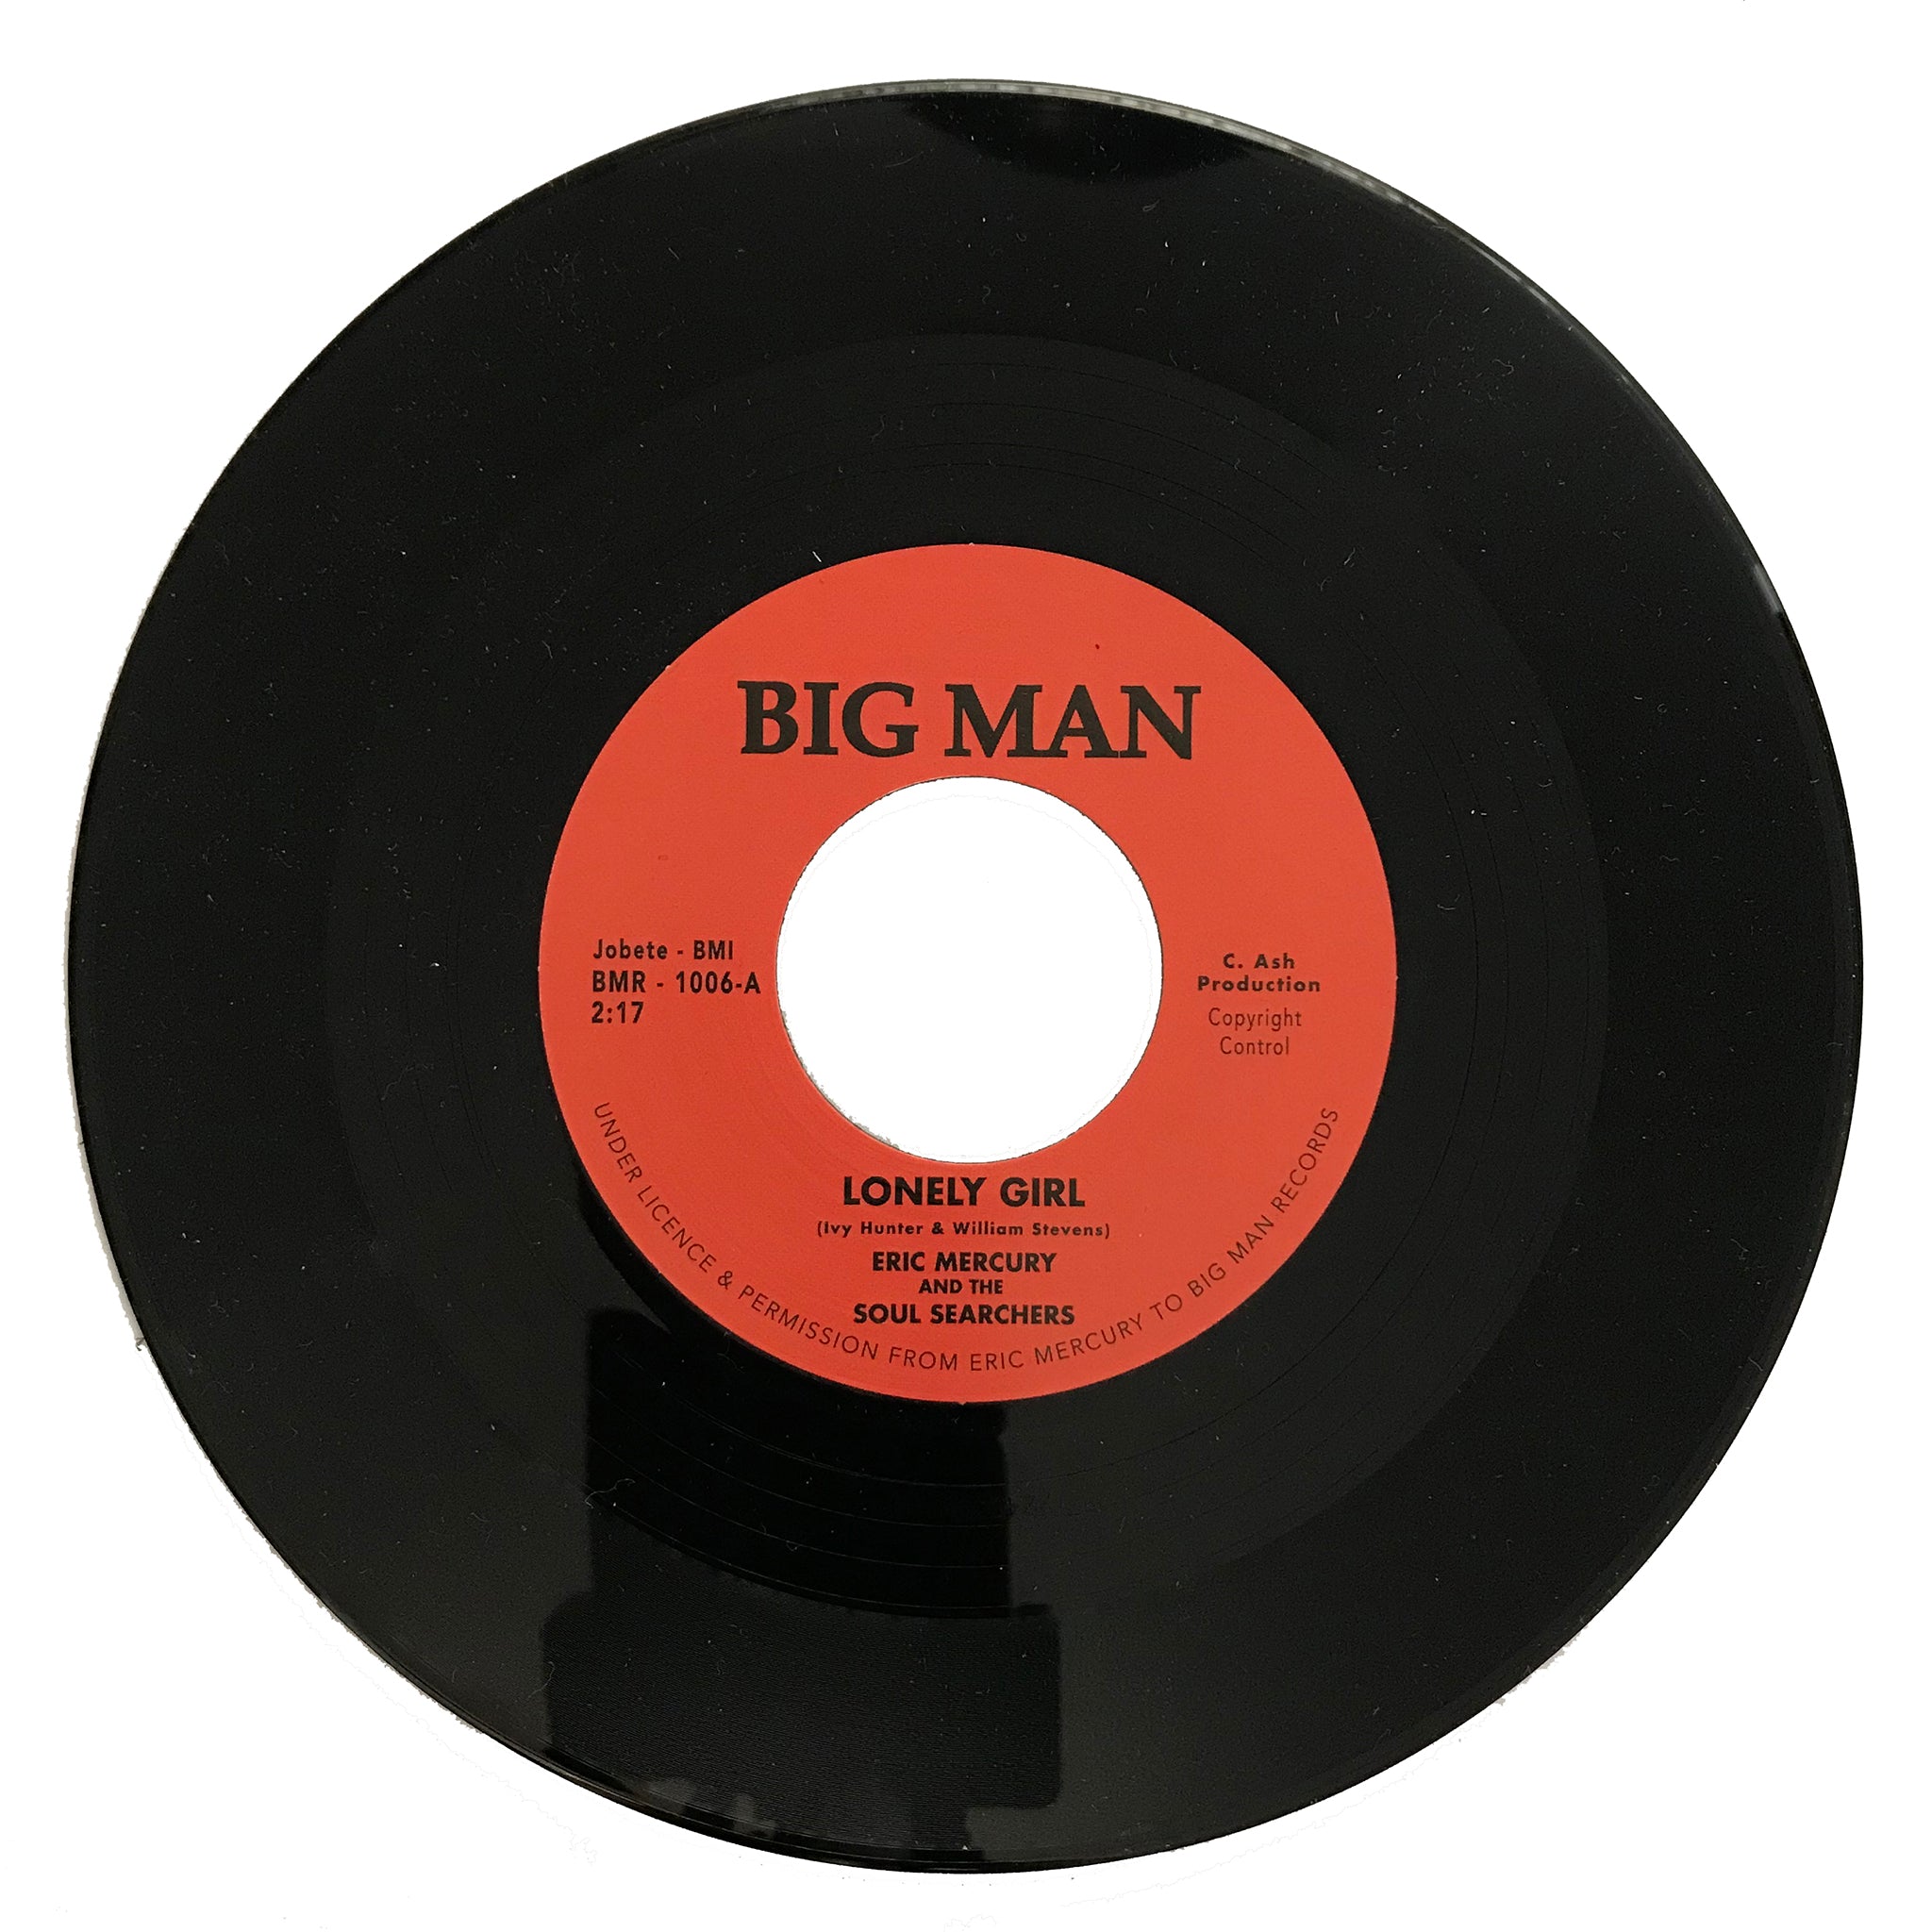 Northern-Soul-Eric-Mercury-Soul-Searchers-Lonely-Girl-Part-One-Big-Man-1006-A